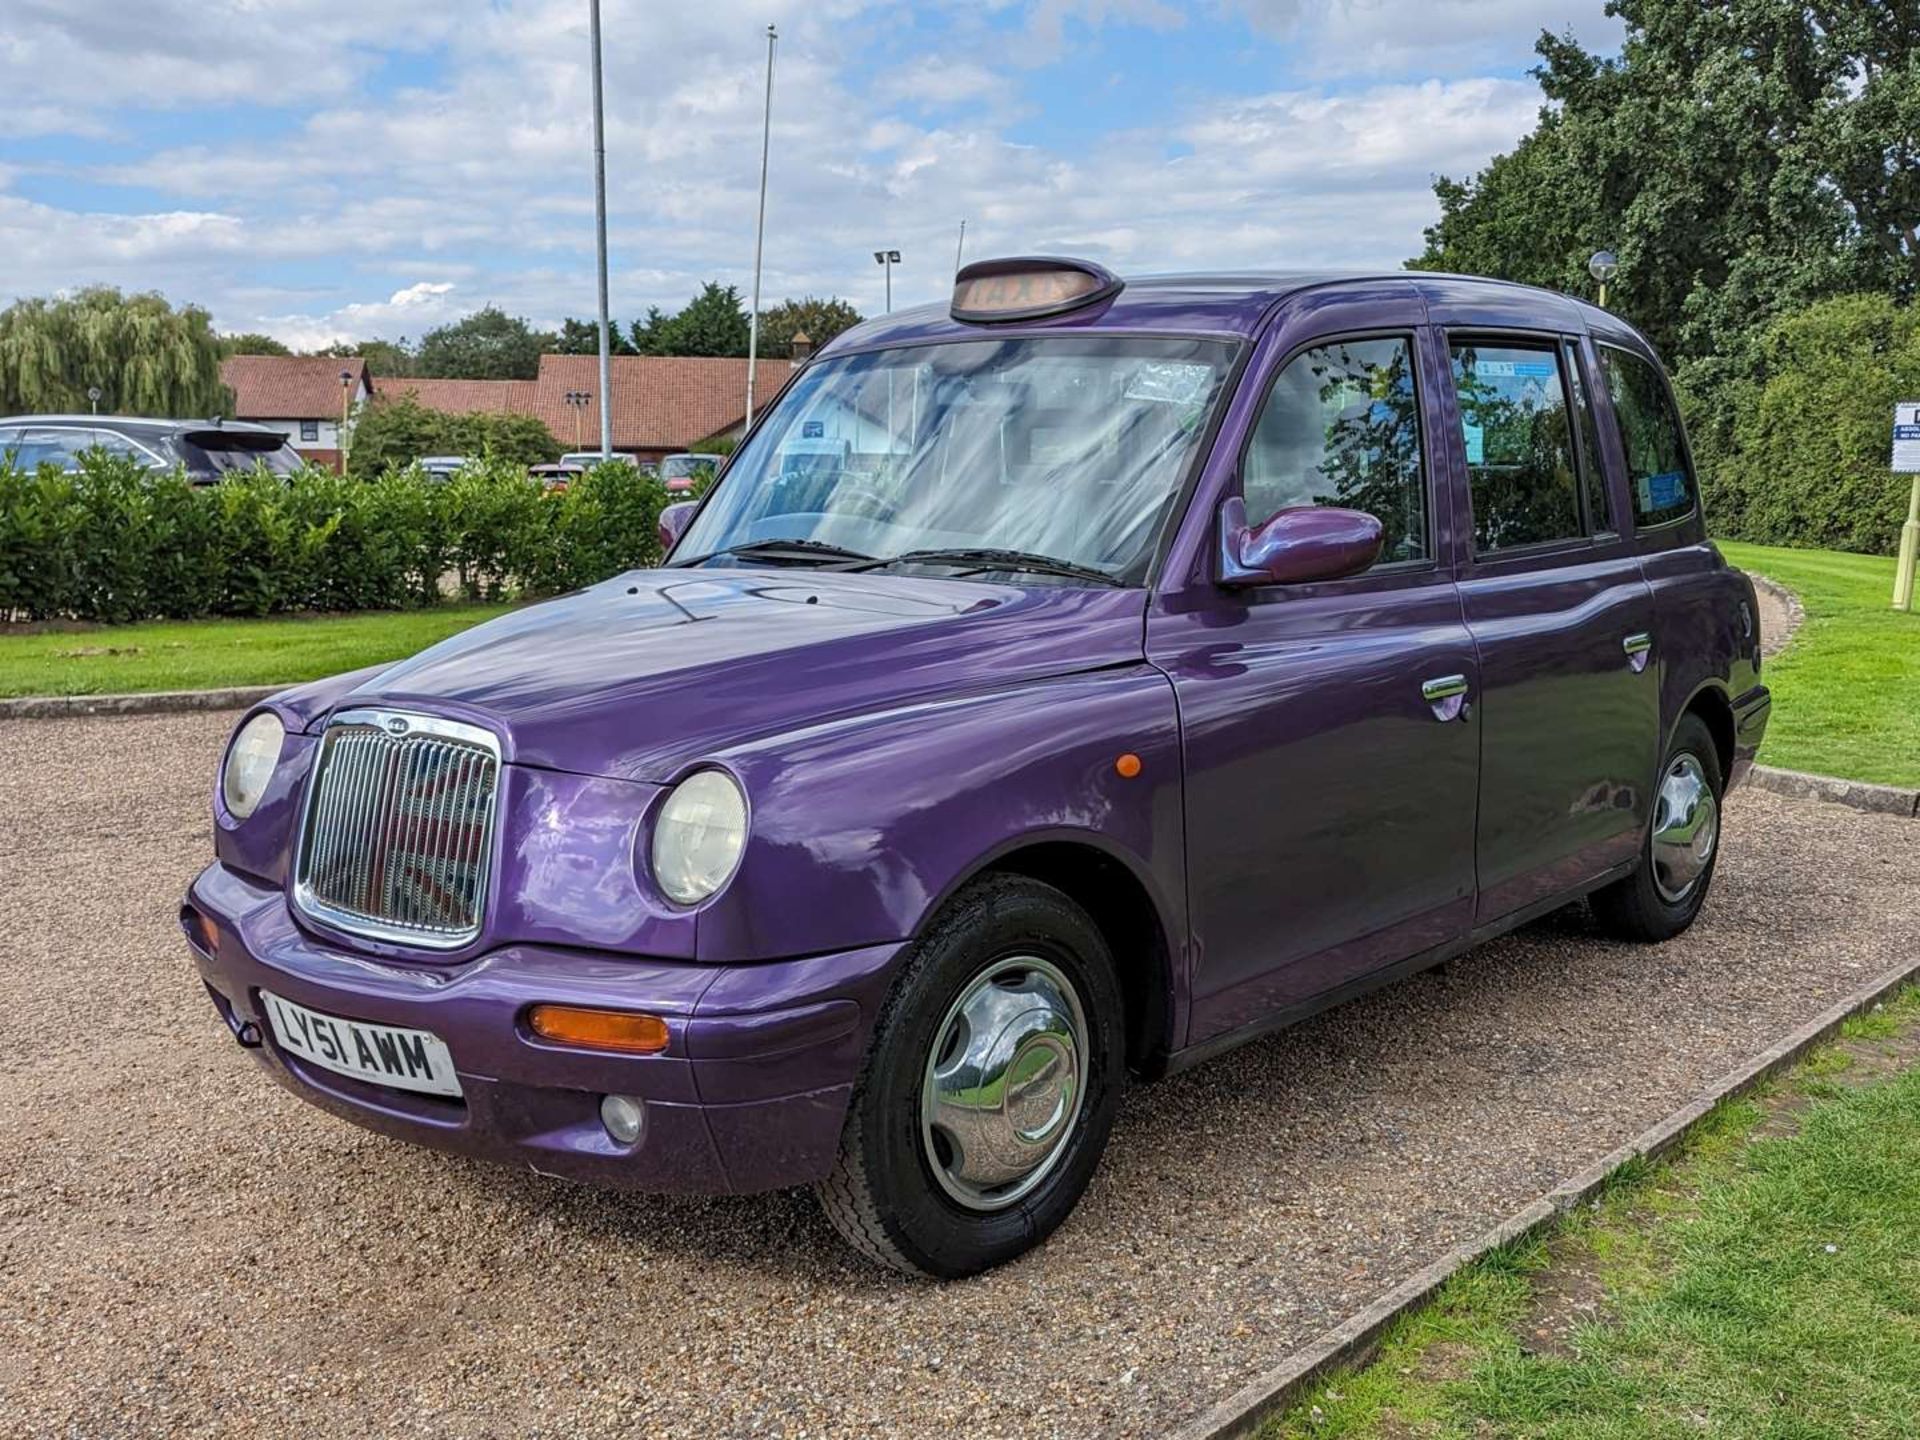 2002 LONDON TAXIS INT TX1 LPG/FUEL - Image 3 of 30